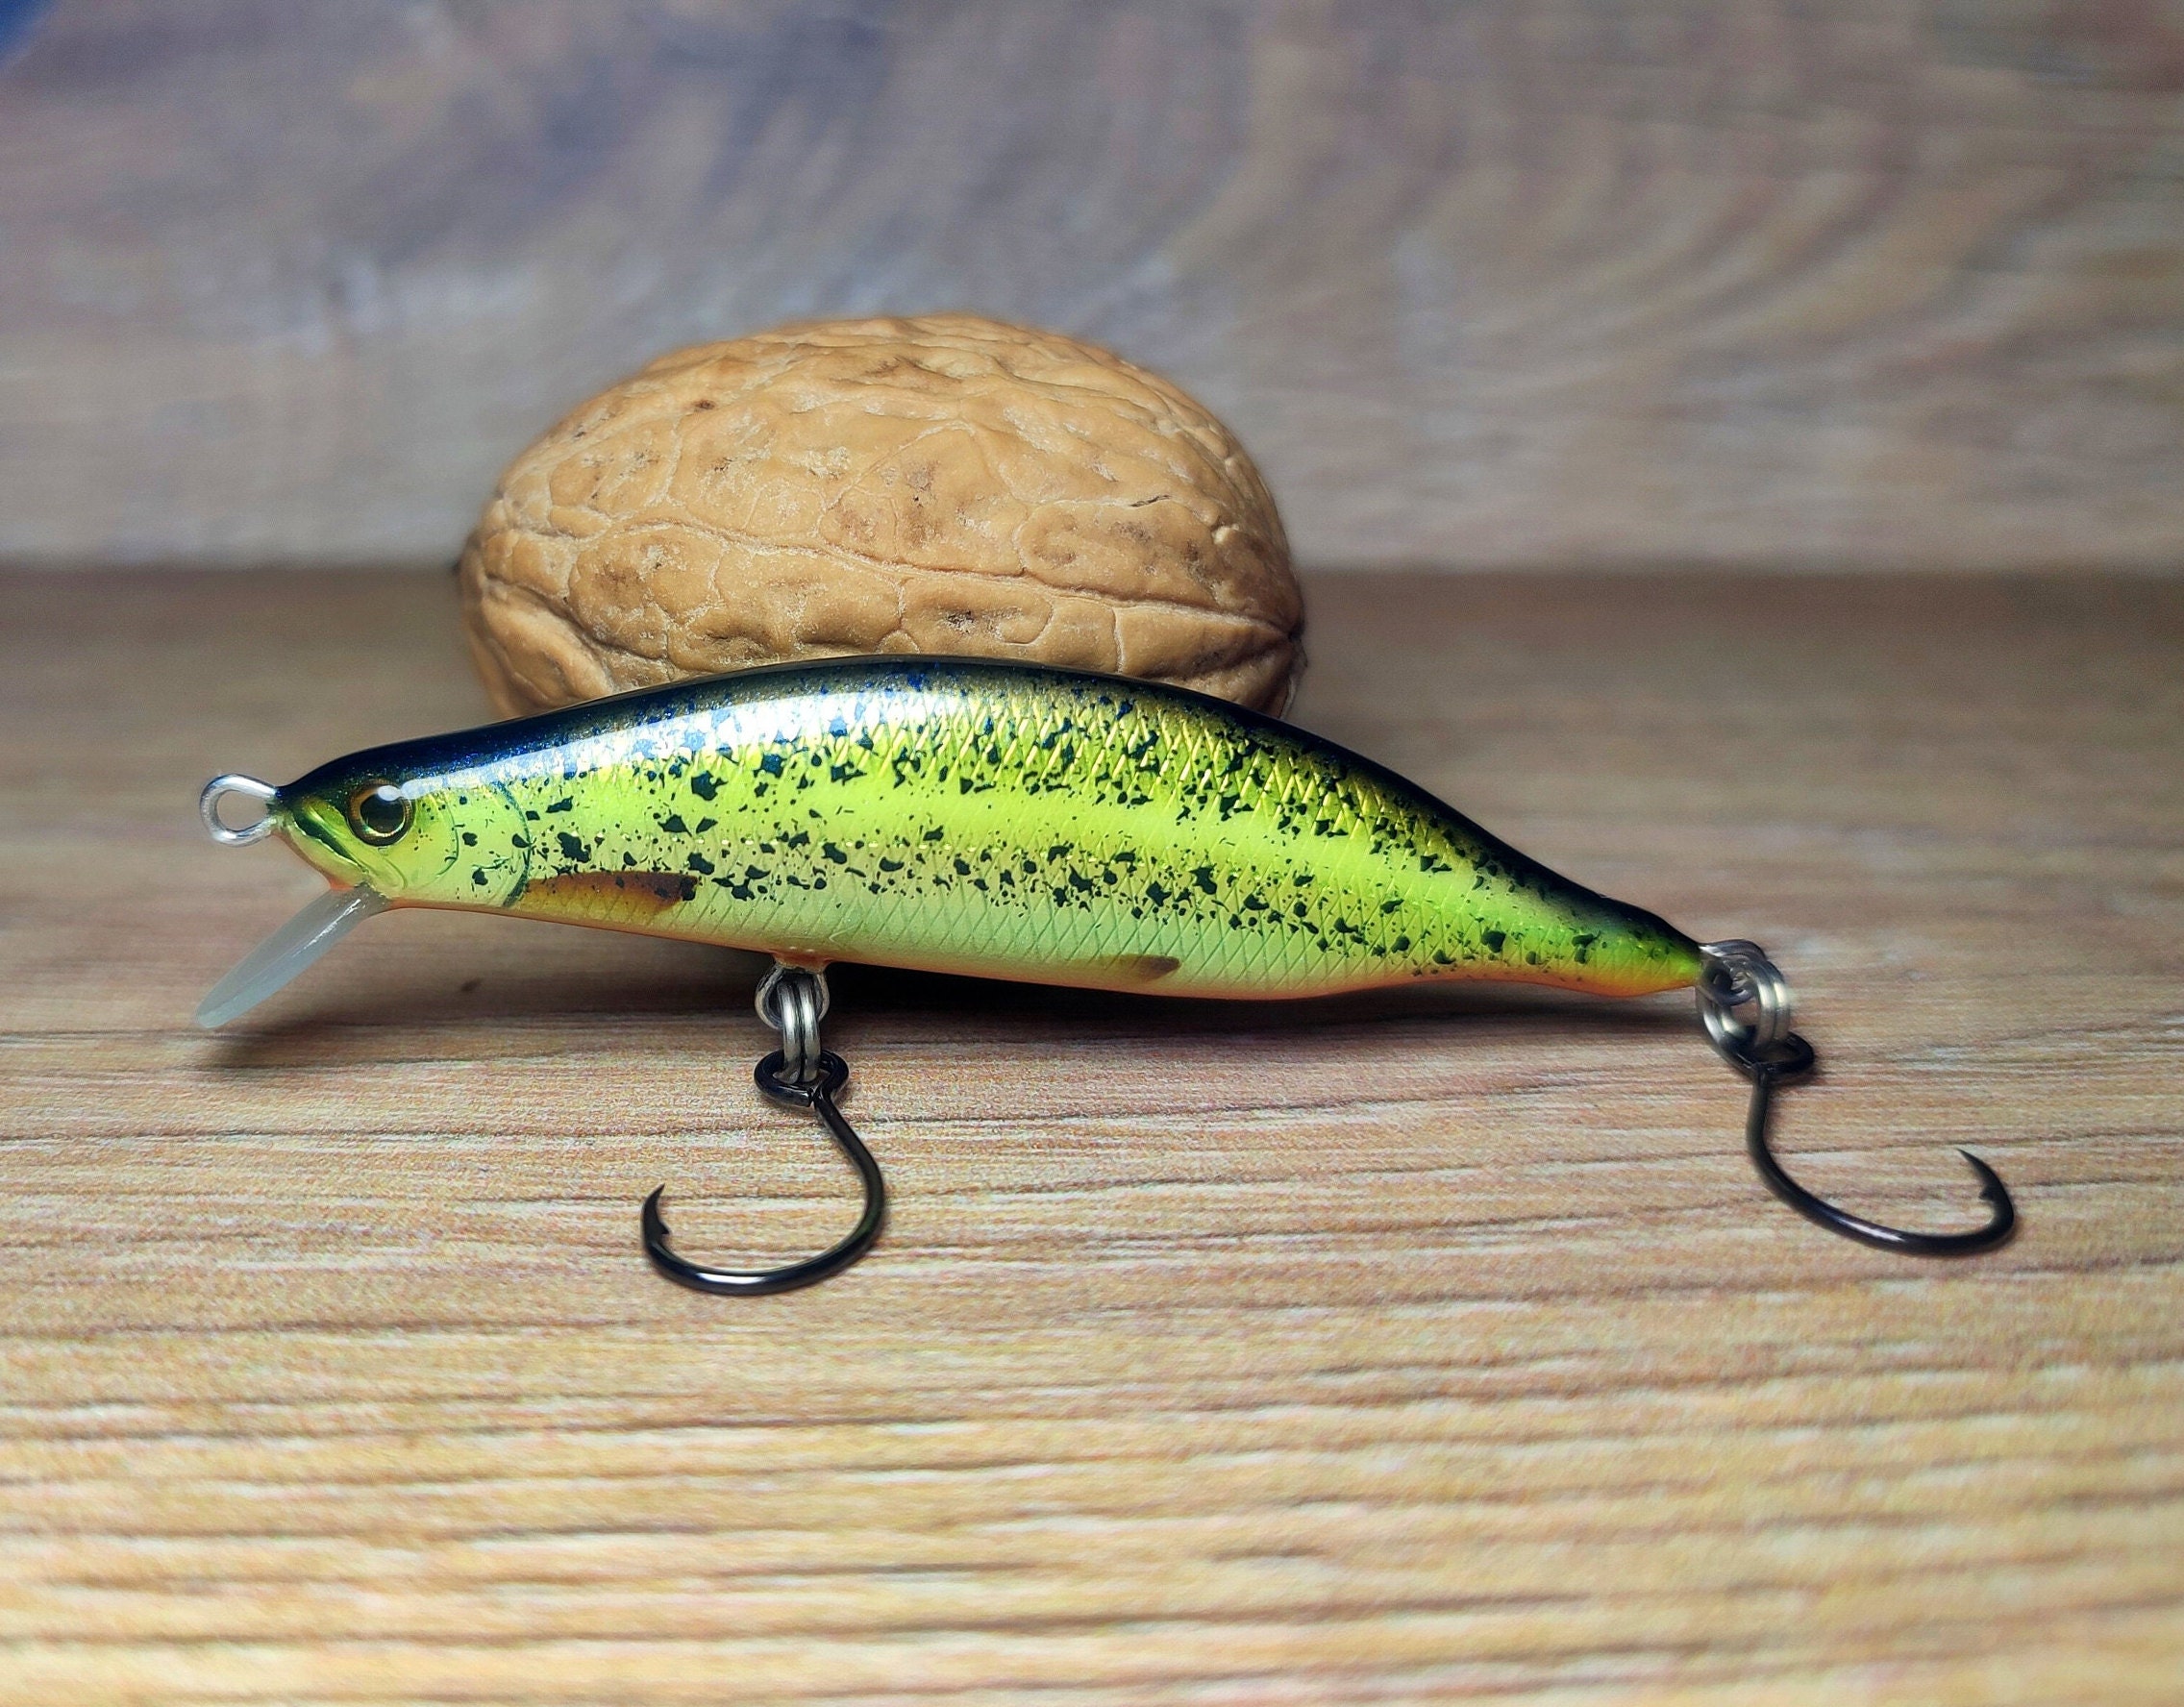 VHL 110mm-18gr Floating,two Piece Lure.trout,salmon,bass,pike,muskie,hucho  Hucho,taimen Fishing Bait Treble Hooks. Gift for Fisherman. -  Finland